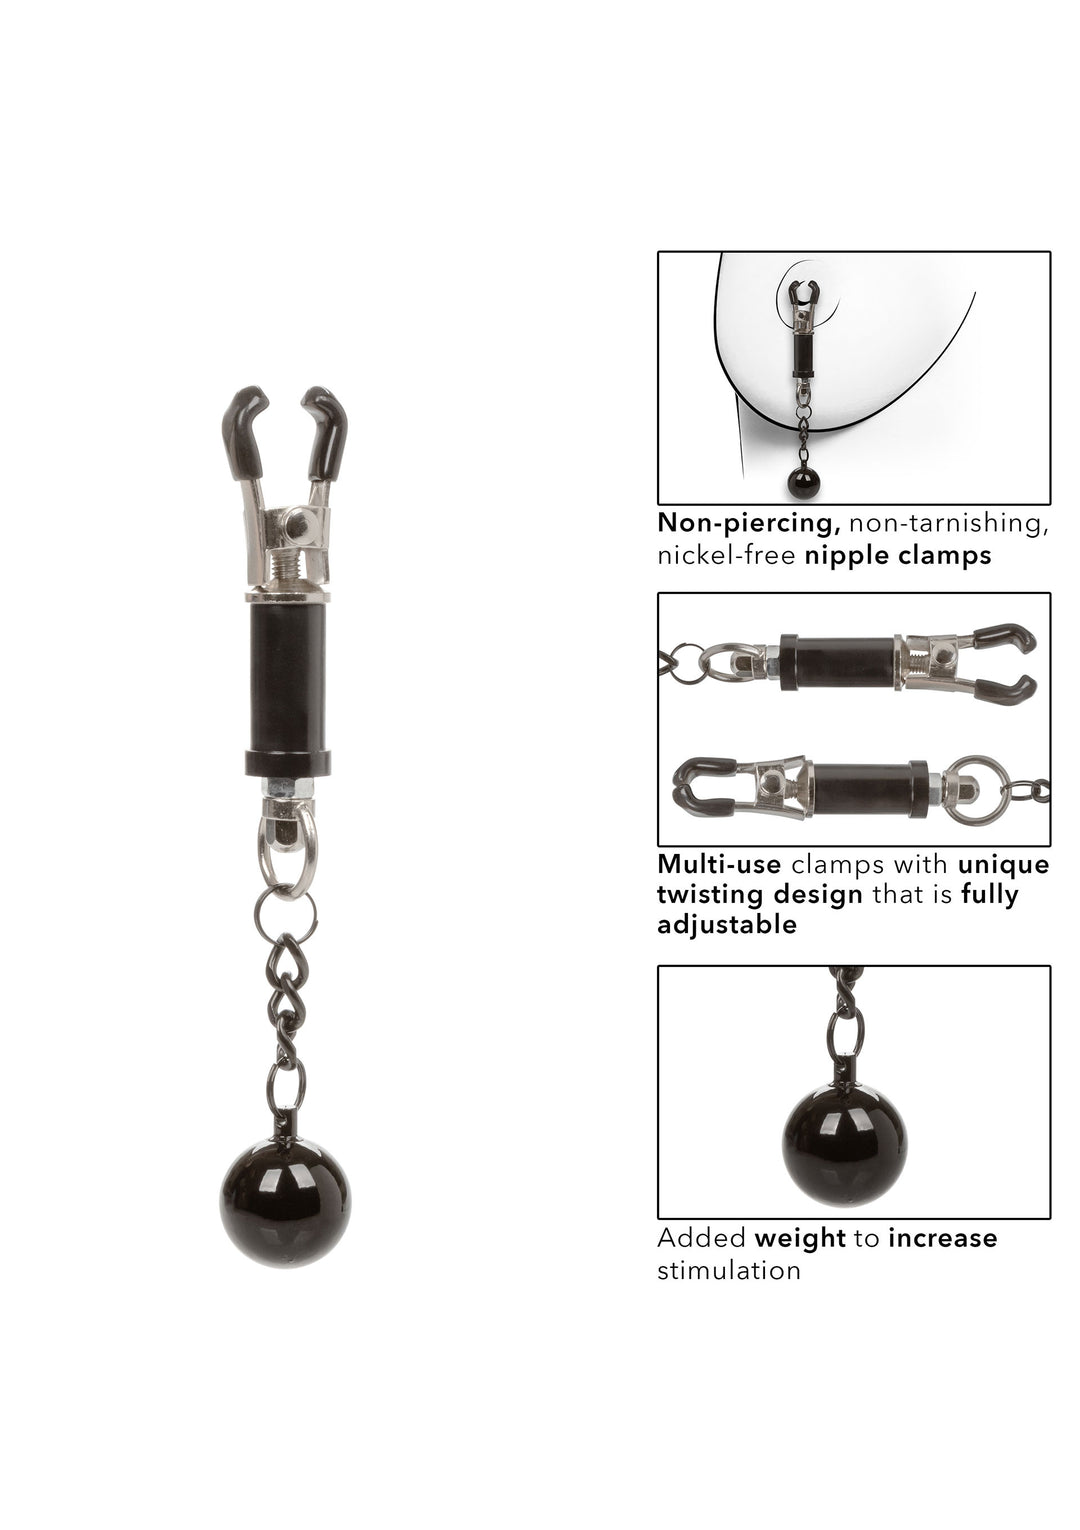 Pinze per capezzoli Weighted Twist Nipple Clamps